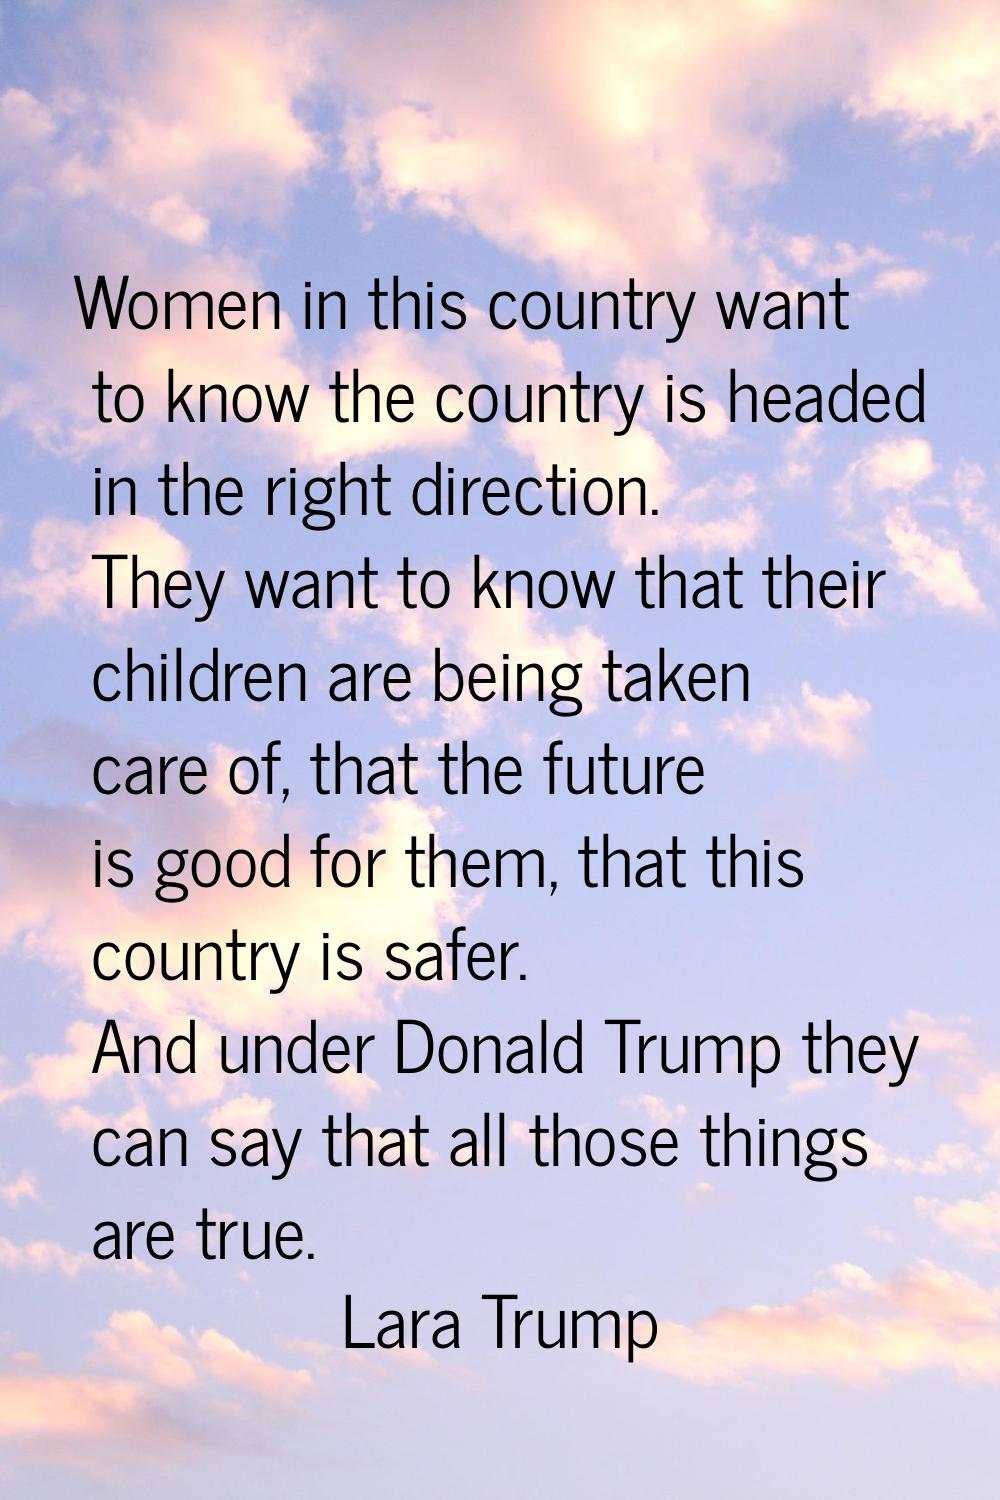 Women in this country want to know the country is headed in the right direction. They want to know 